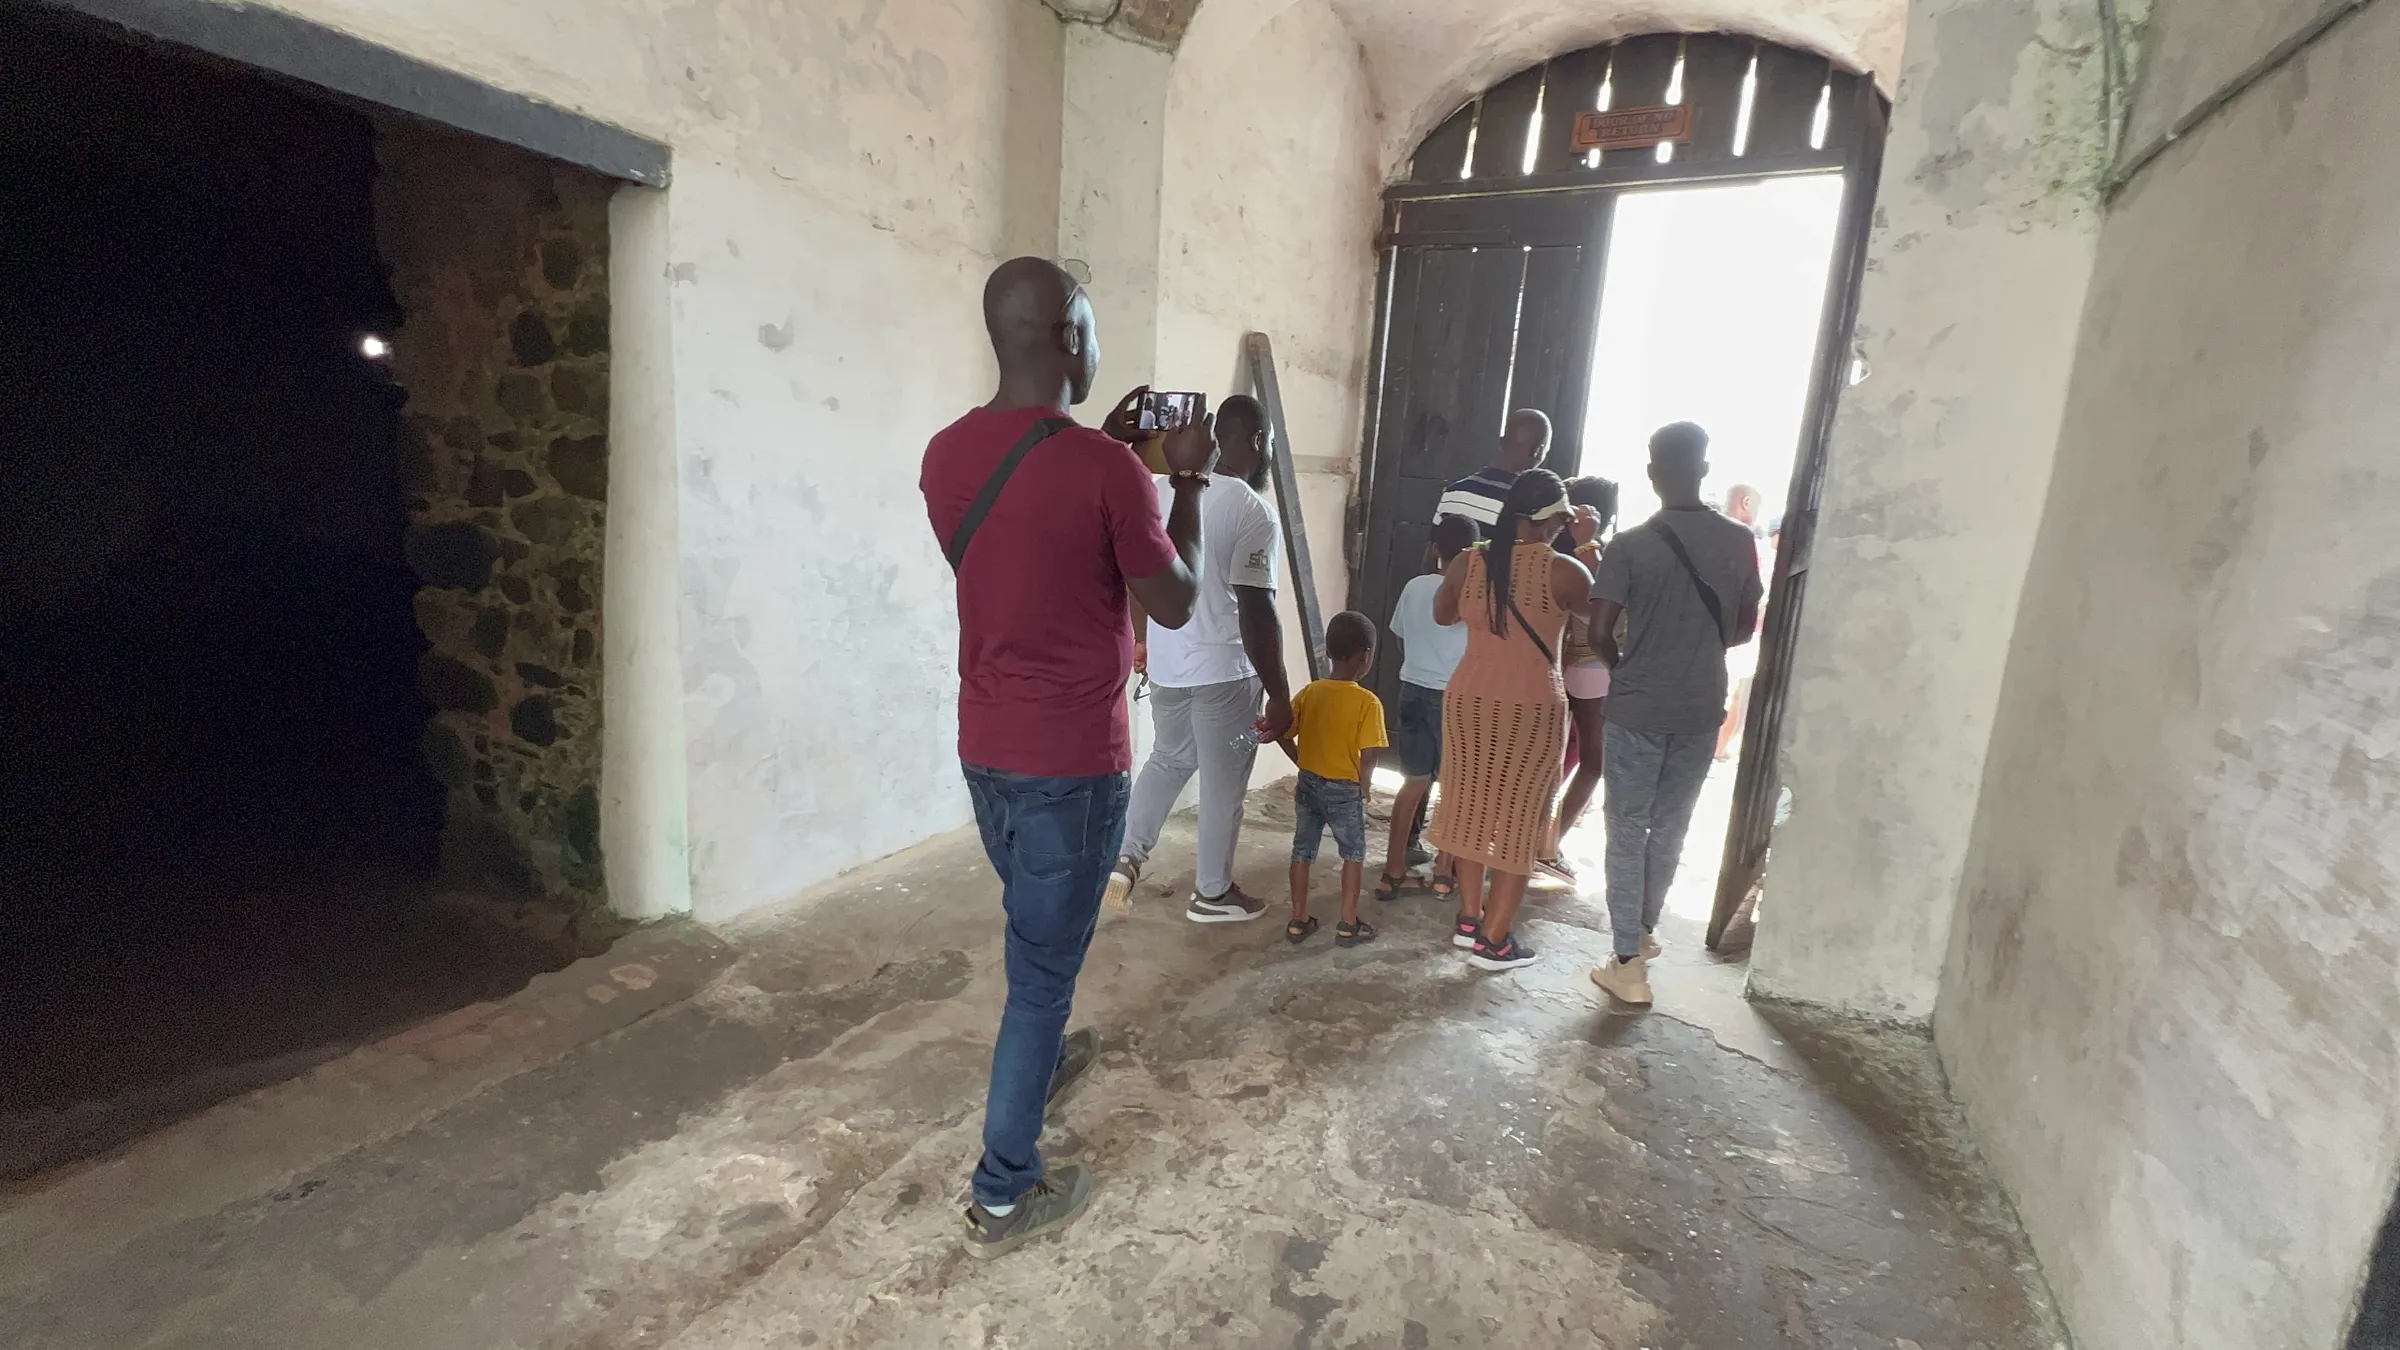 Tourists walk through the "Door of No Return" at Cape Coast Castle on the Cape Coast, Ghana on August 9, 2022.